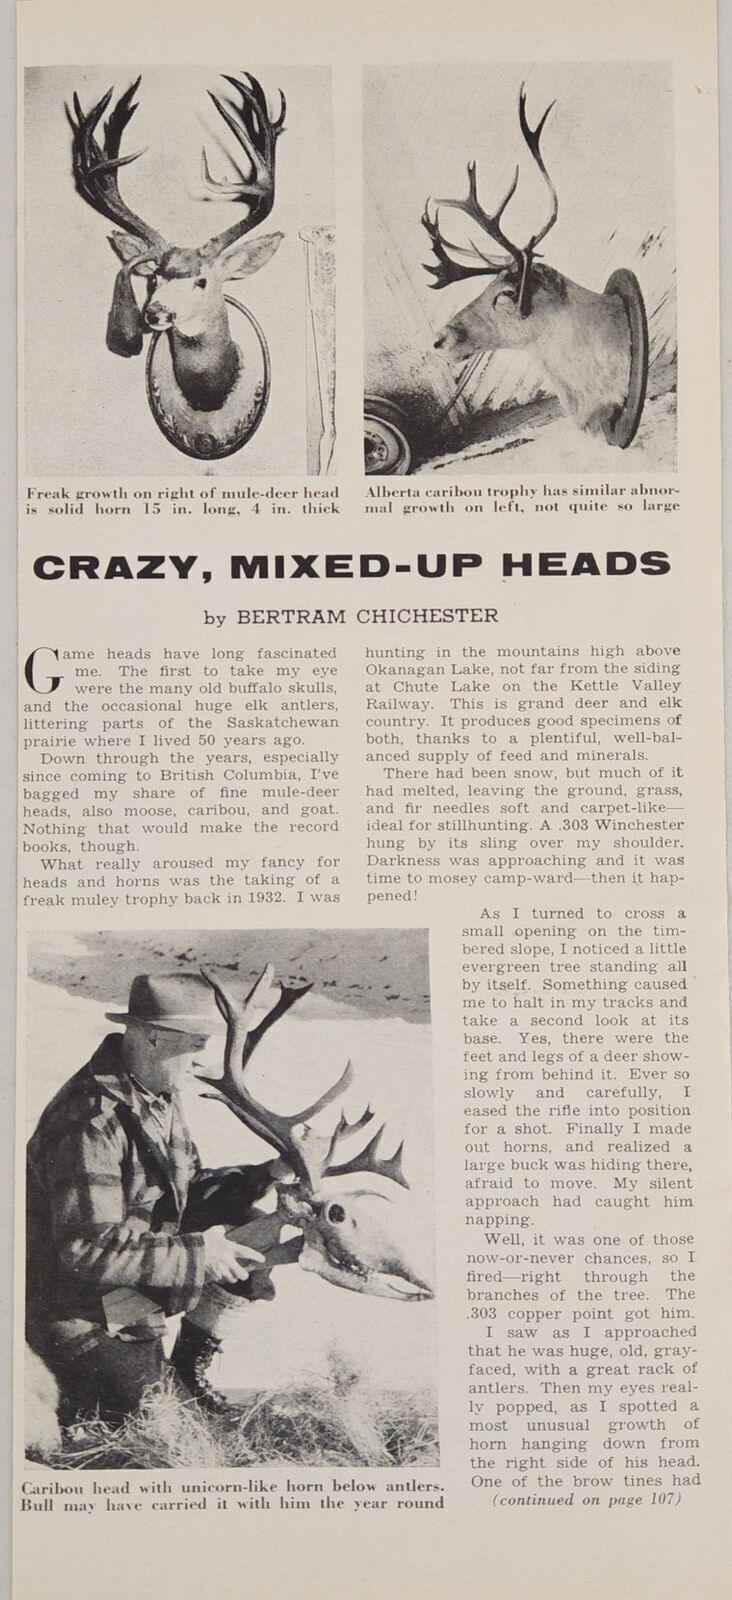 1956 Magazine Photos Game Head Mounts with Abnormal Freaky Horns,Antlers